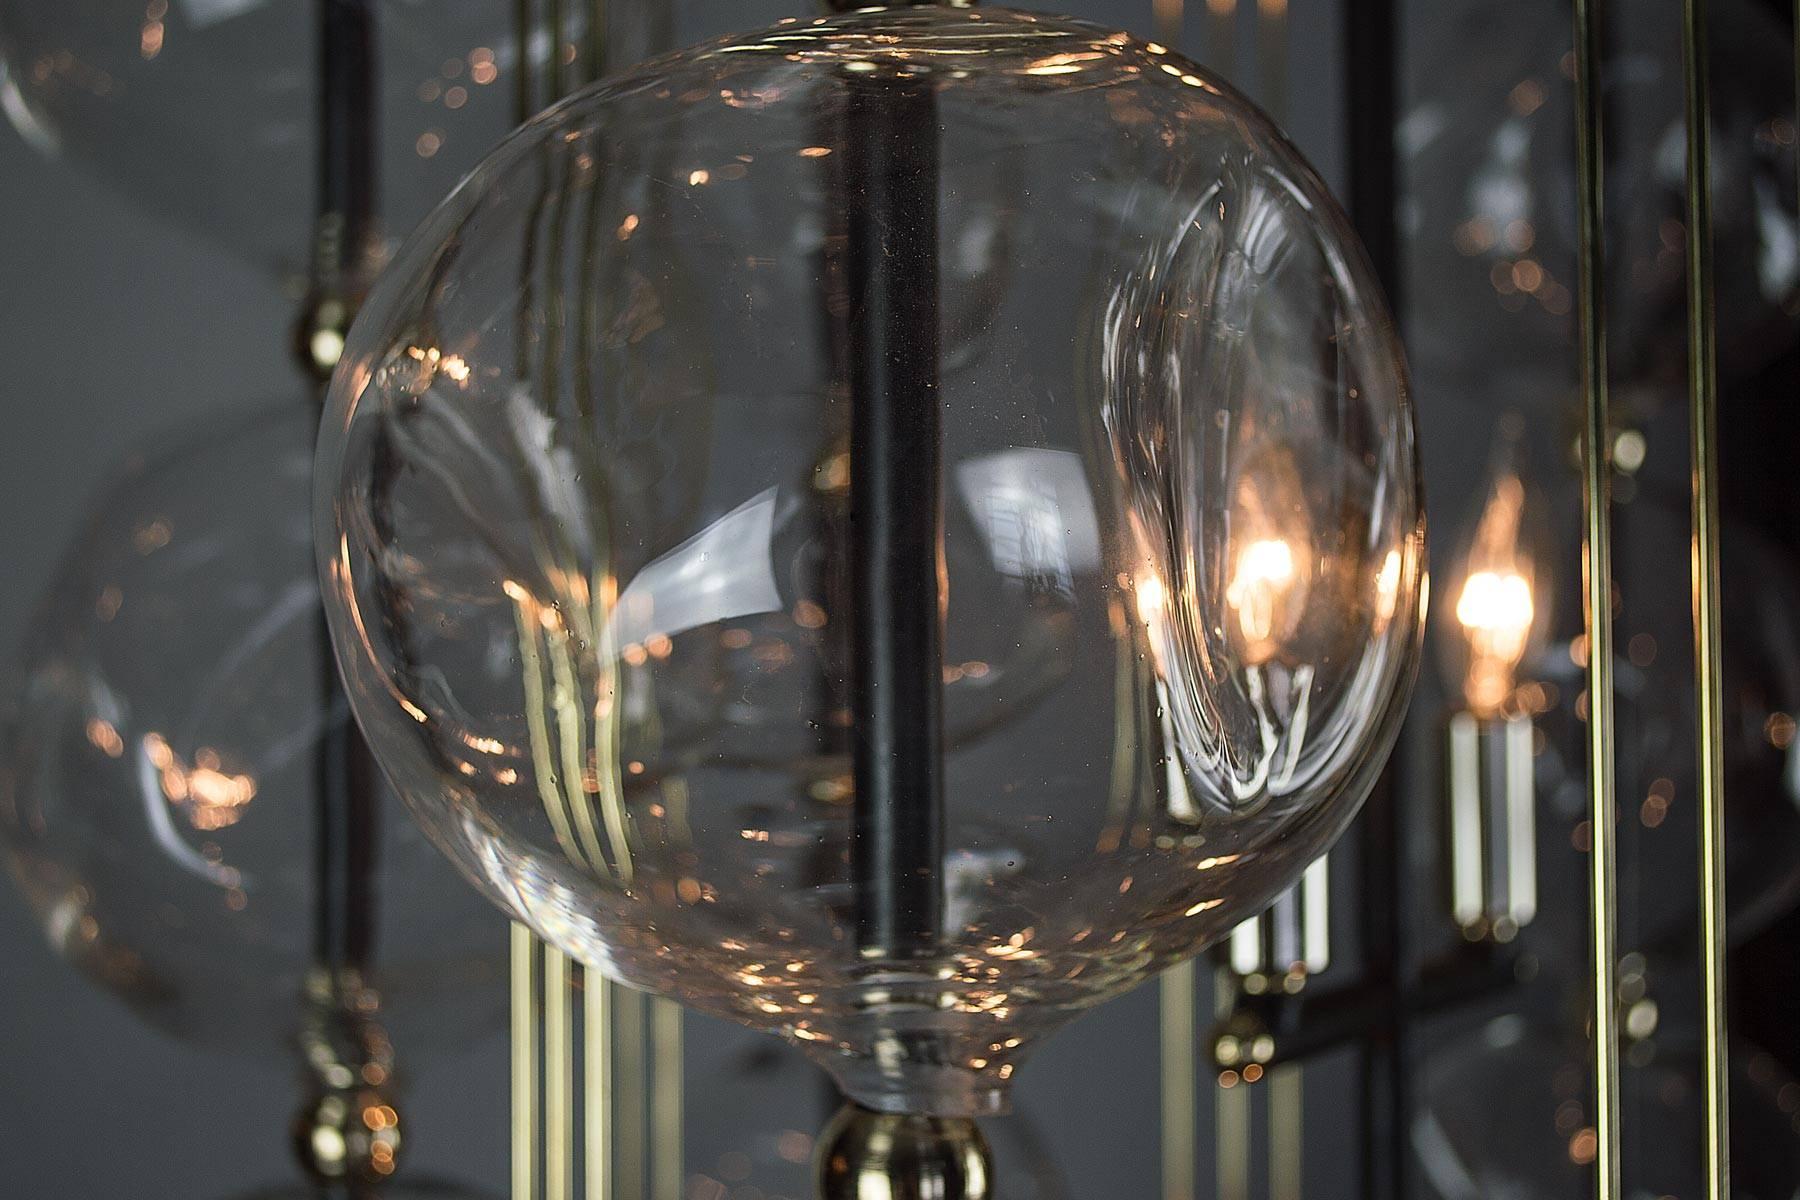 A fresh expression of the Classic lantern created to accentuate the shimmering light which reflects in the many contours of the glass. The handblown glass orbs with their asymmetrical shapes are assembled on a hexagonal gunmetal steel frame. The